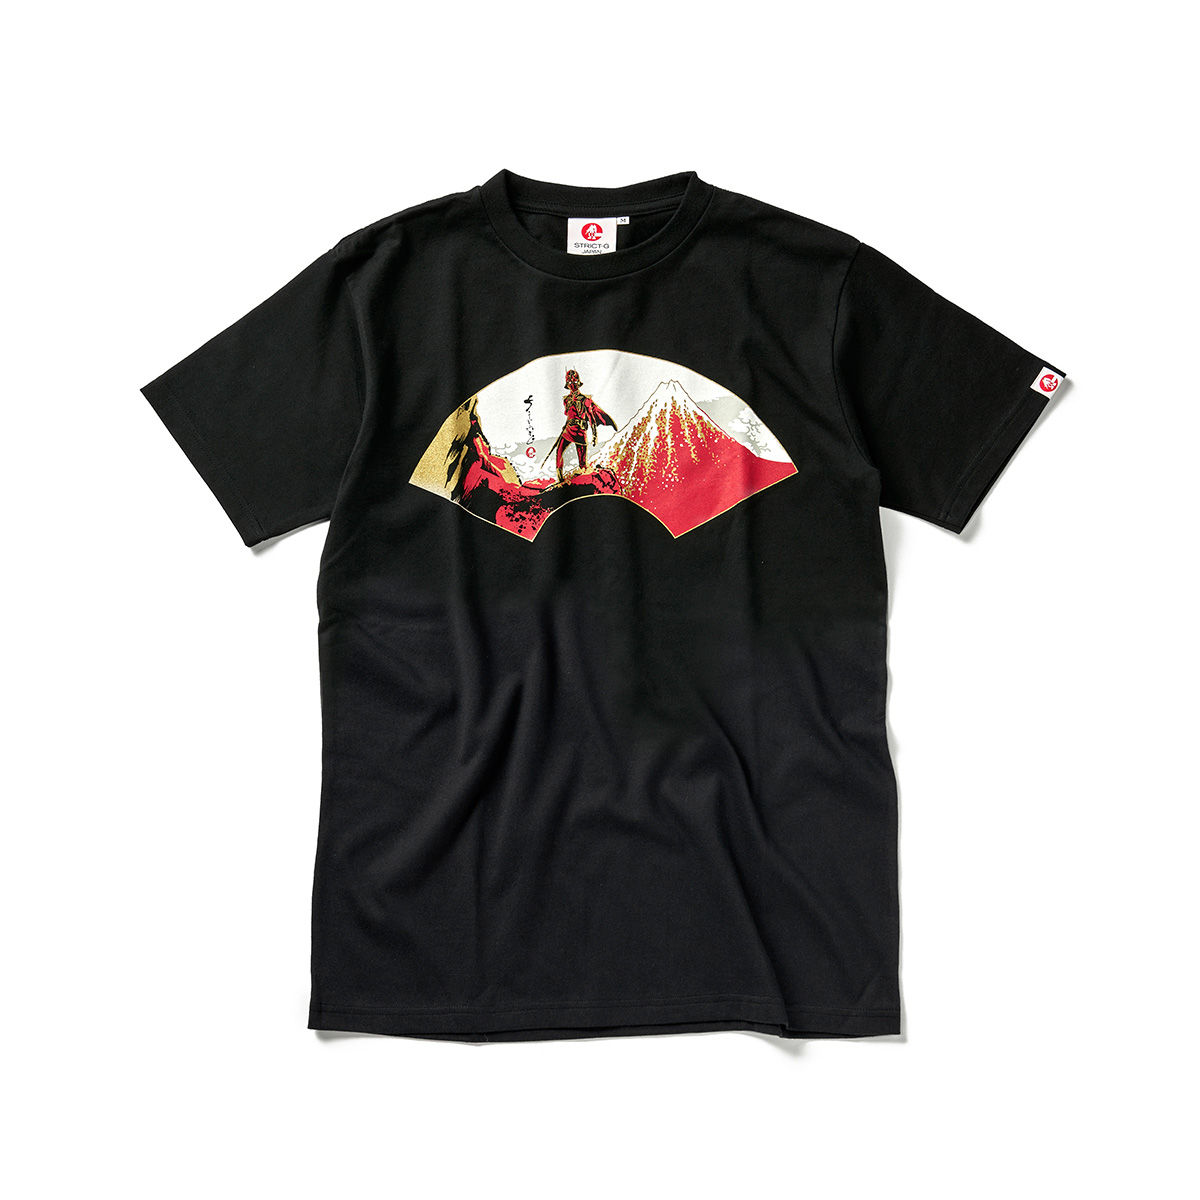 Char and Red Mountain Fuji T-shirt—Mobile Suit Gundam/STRICT-G JAPAN Collaboration